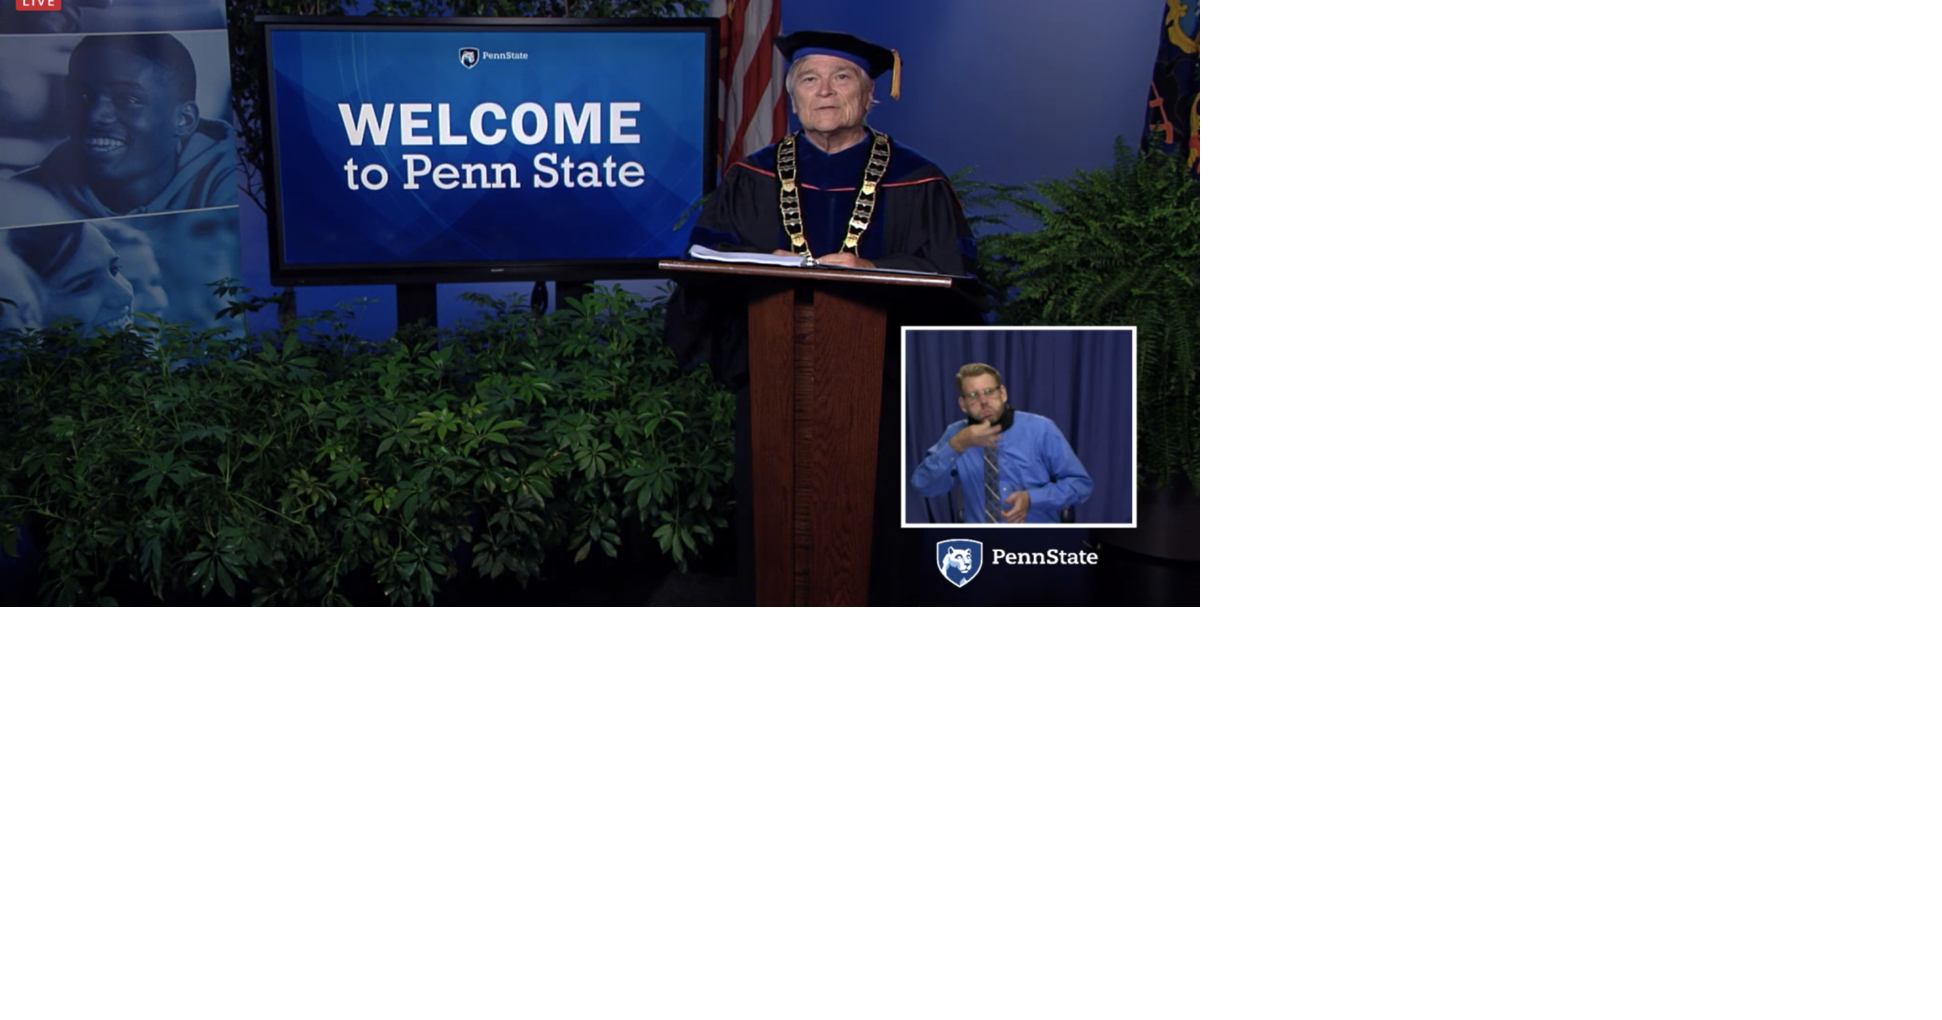 Penn State’s virtual convocation features former astronaut, various